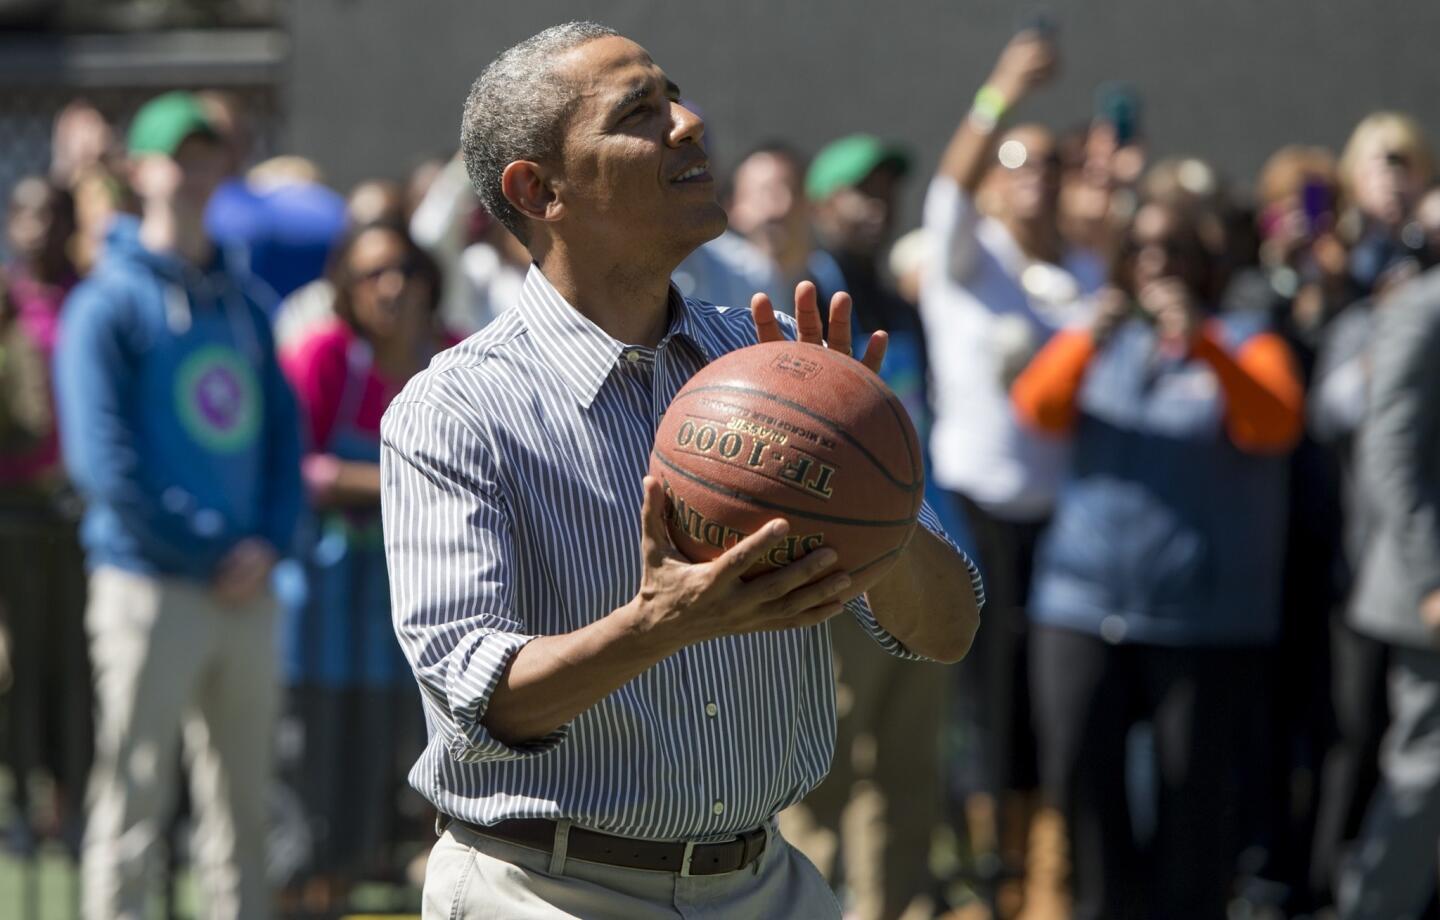 President Obama shoots a basket during the annual Easter Egg Roll on April 1, 2013, on the South Lawn of the White House in Washington, D.C.